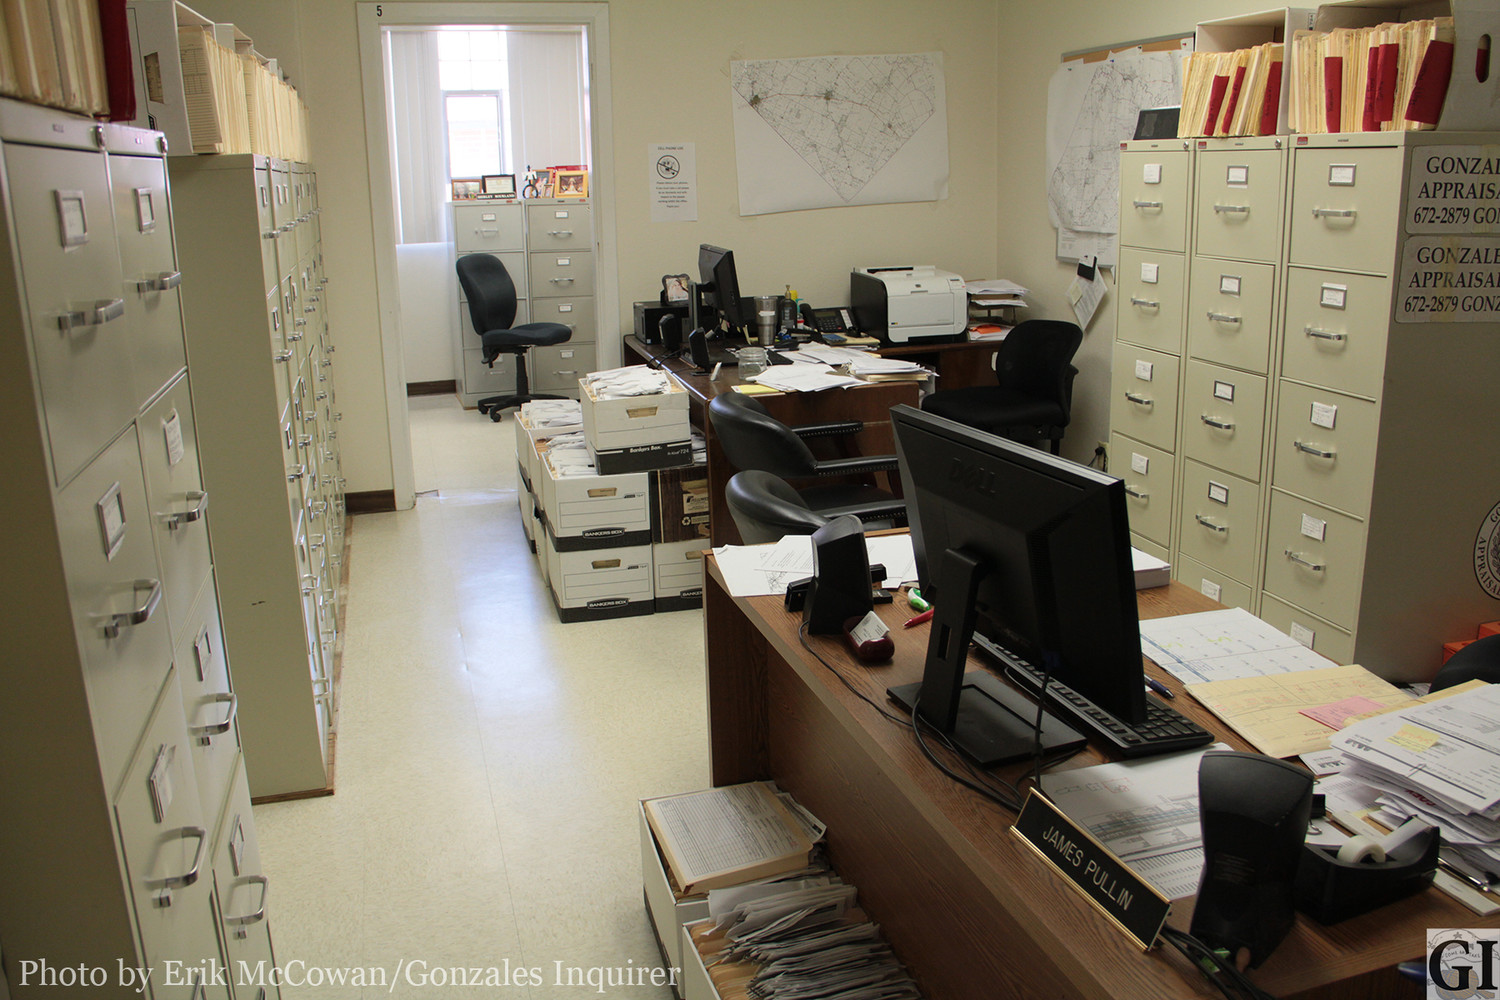 Cramped quarters at the Gonzales CAD building are but one reason that Chief Appraiser John Liford is looking for a new home. He was at the Gonzales city council meeting last Thursday to make the case to council members, who were none too keen on the idea.